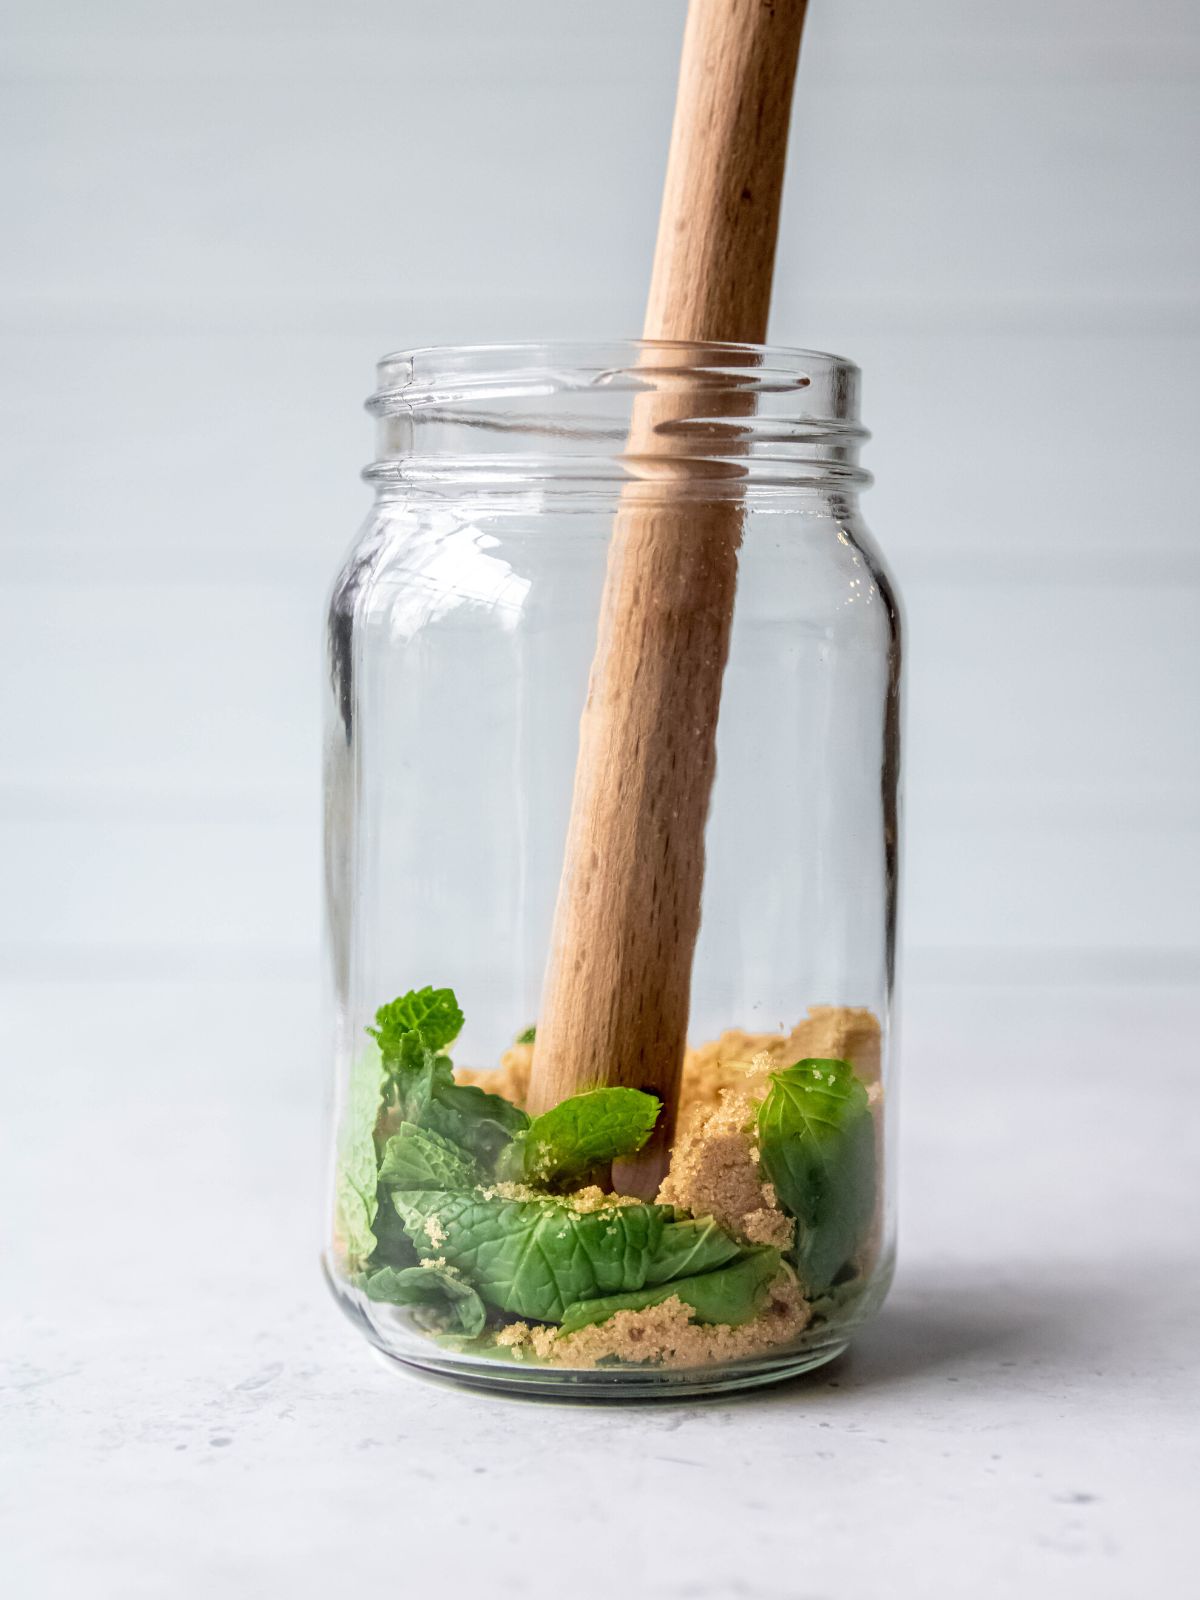 wooden muddling stick crushing the mint leaves into the brown sugar.